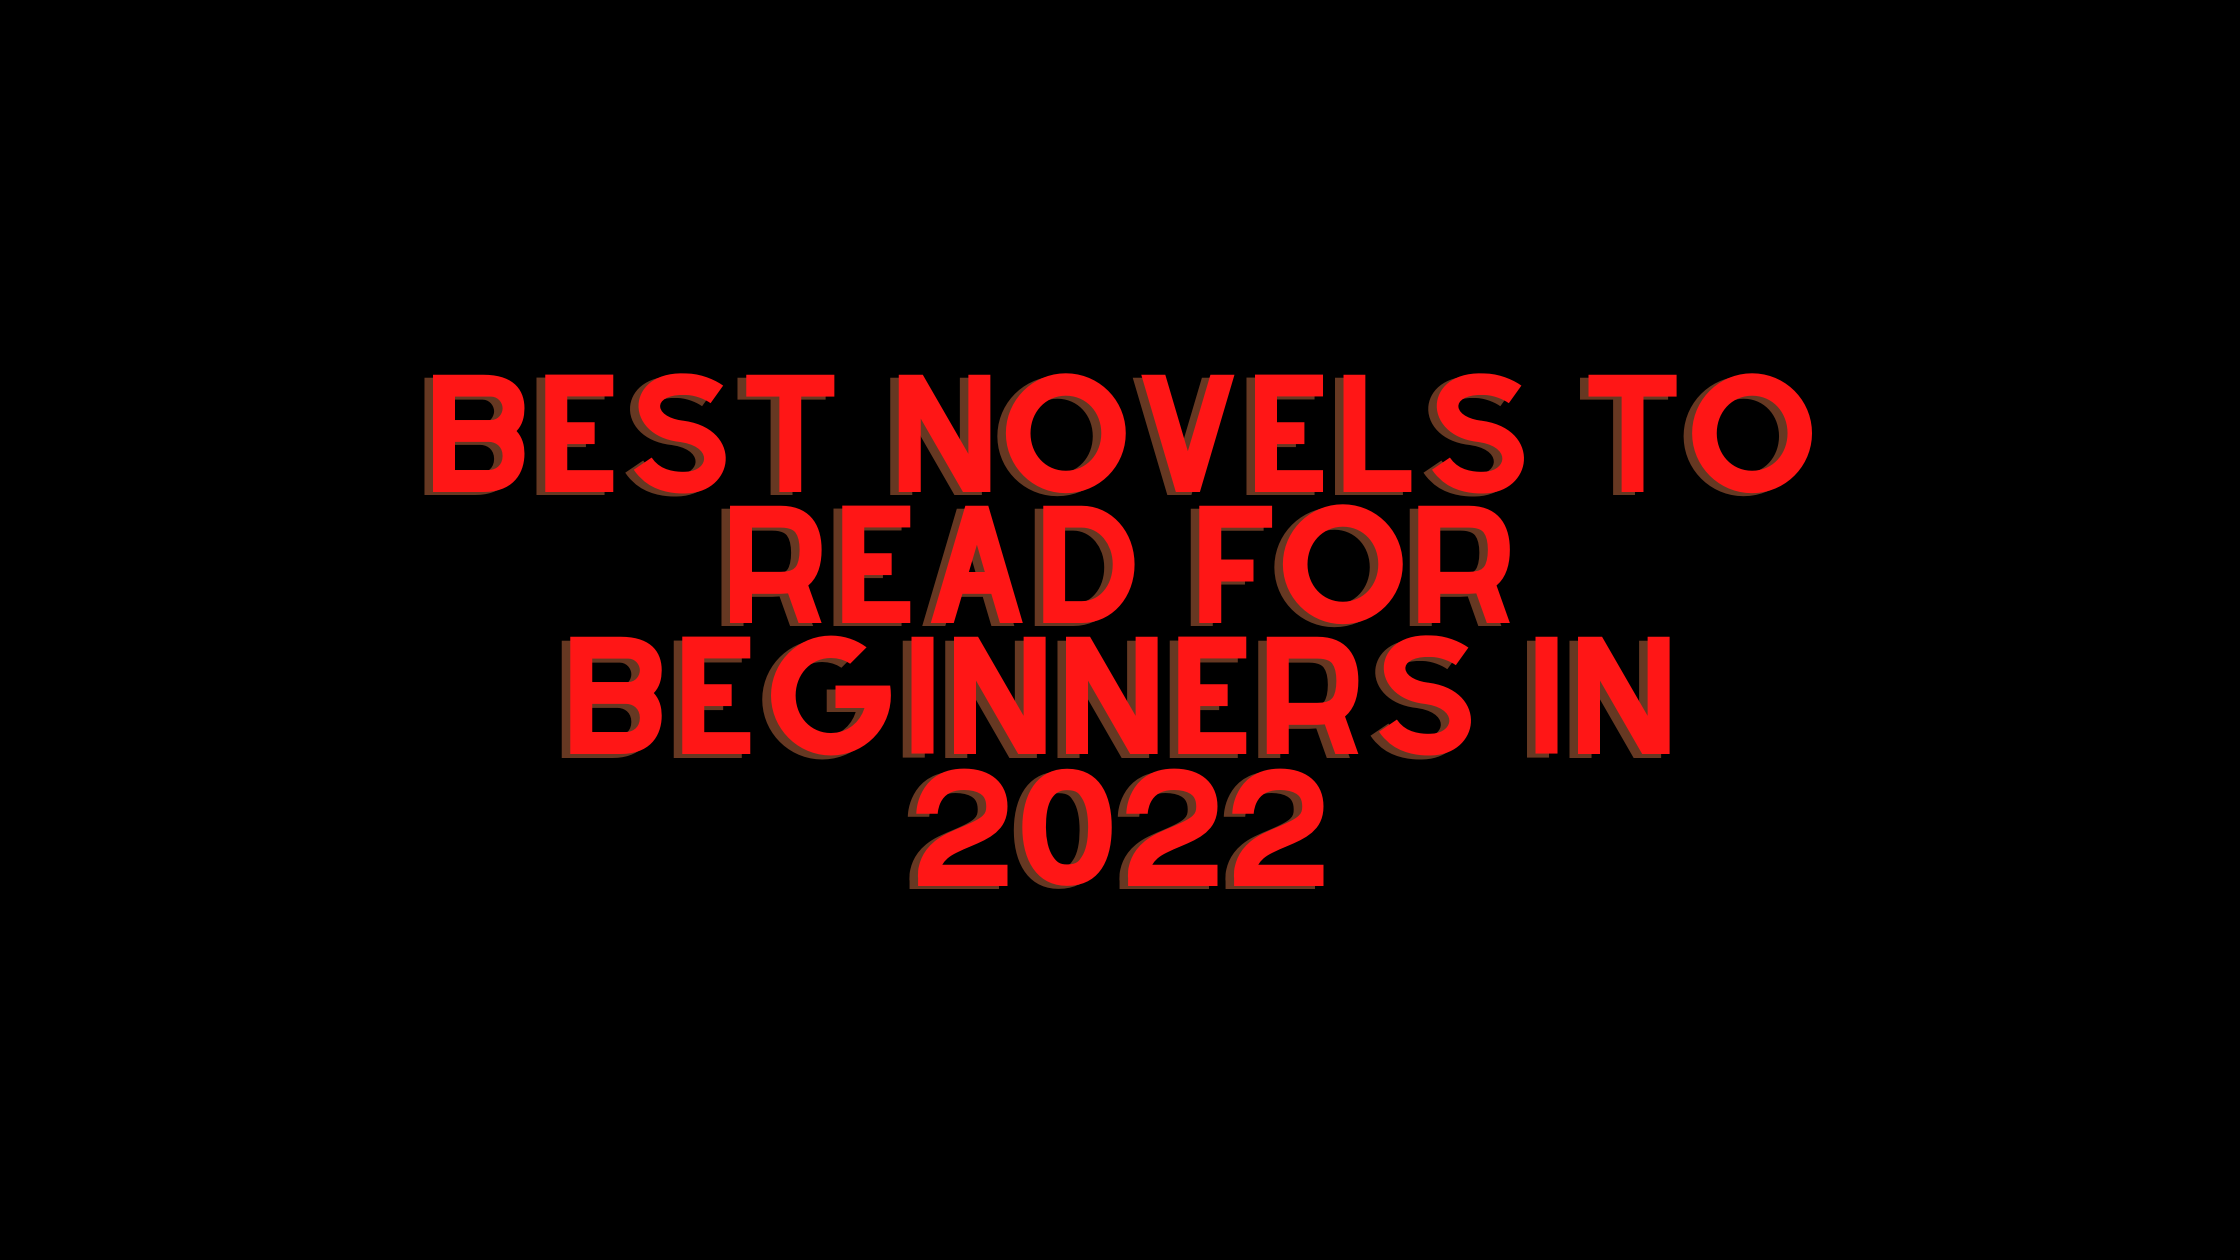 Best Novels To Read For Beginners In 2022